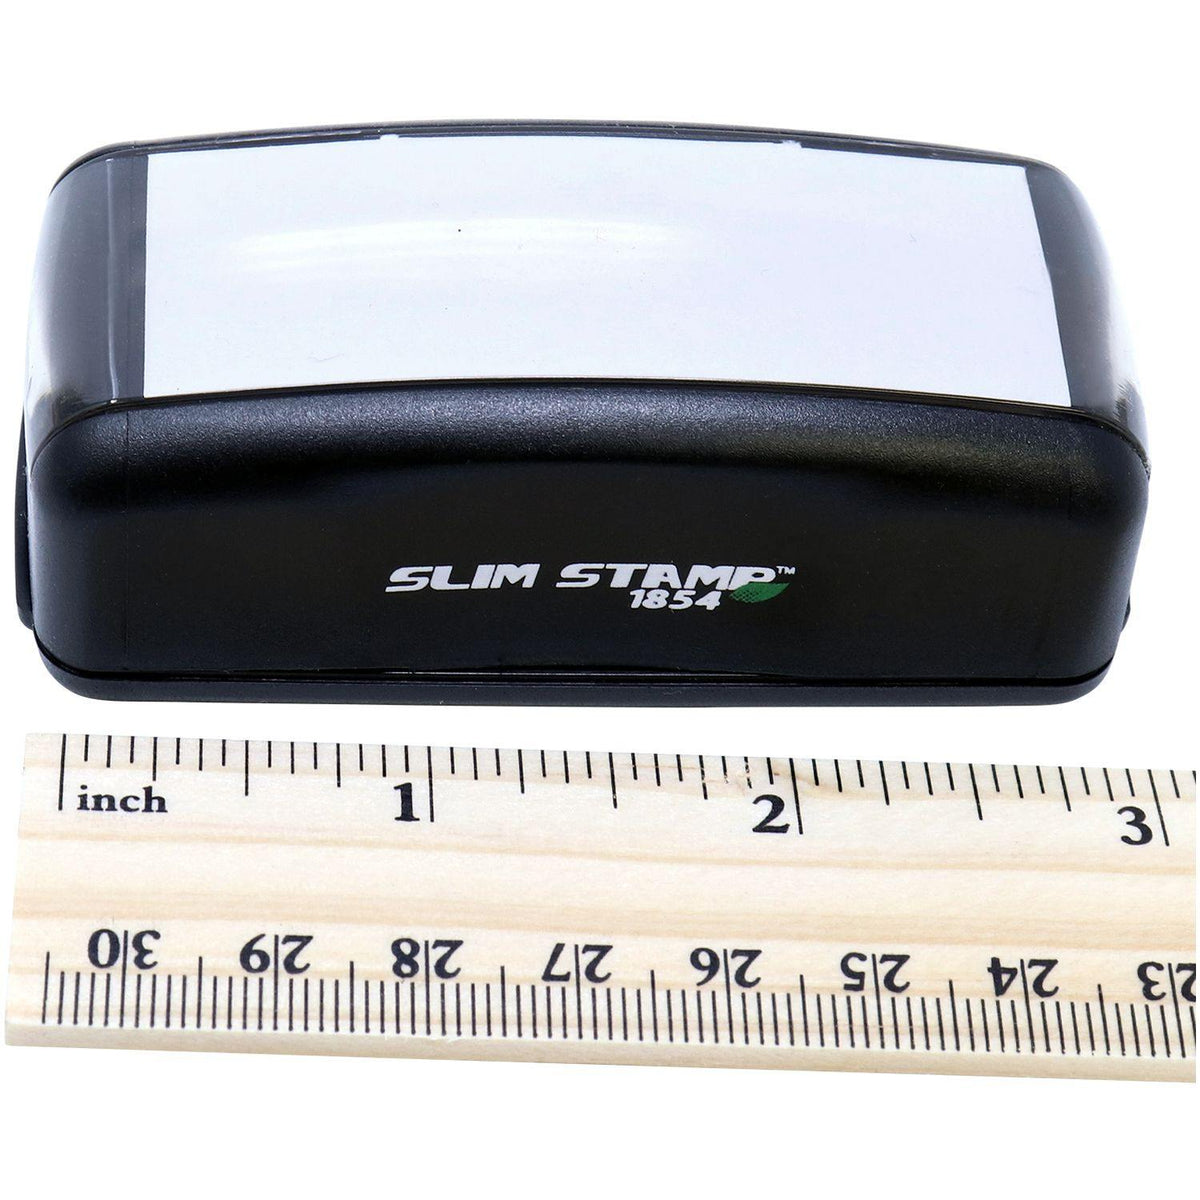 Measurement Large Pre-Inked COD Outline Stamp with Ruler